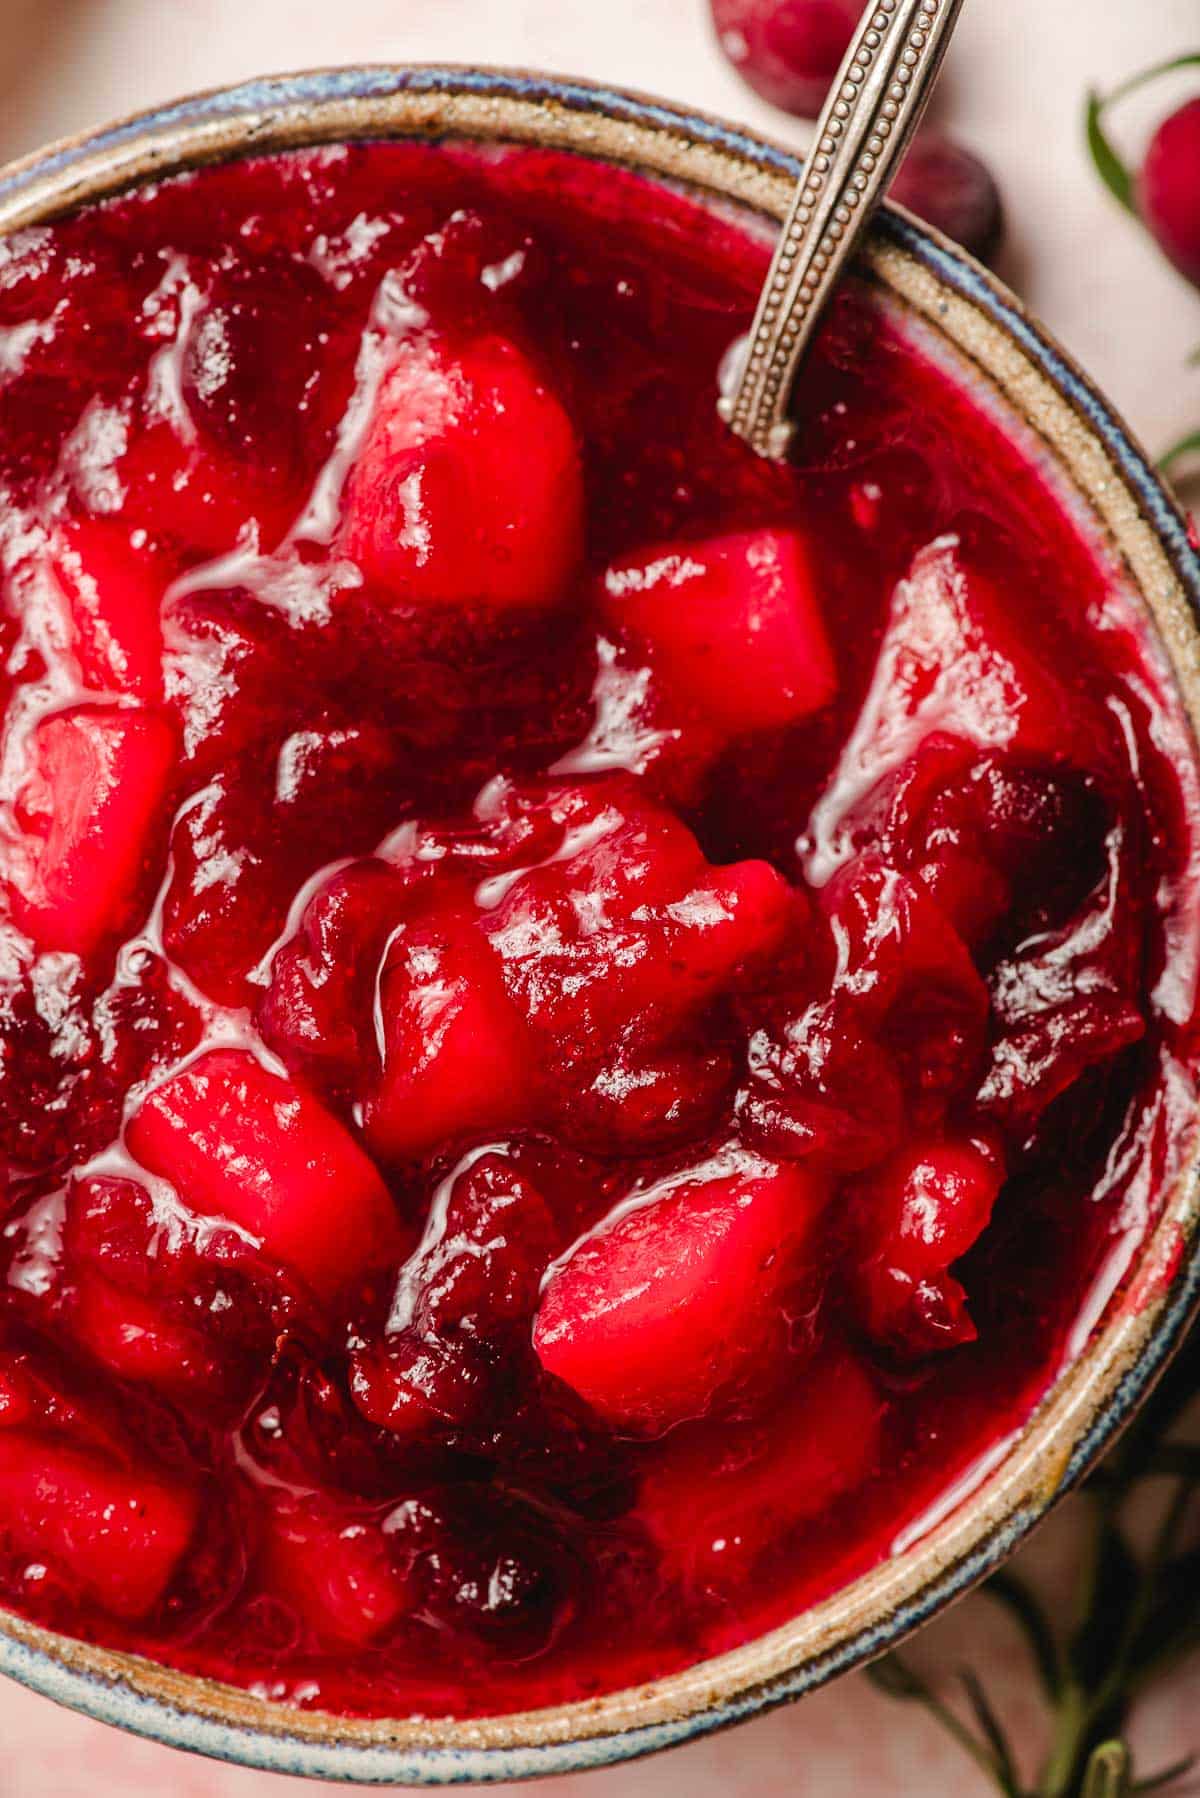 Pear and cranberry sauce in a pottery bowl.